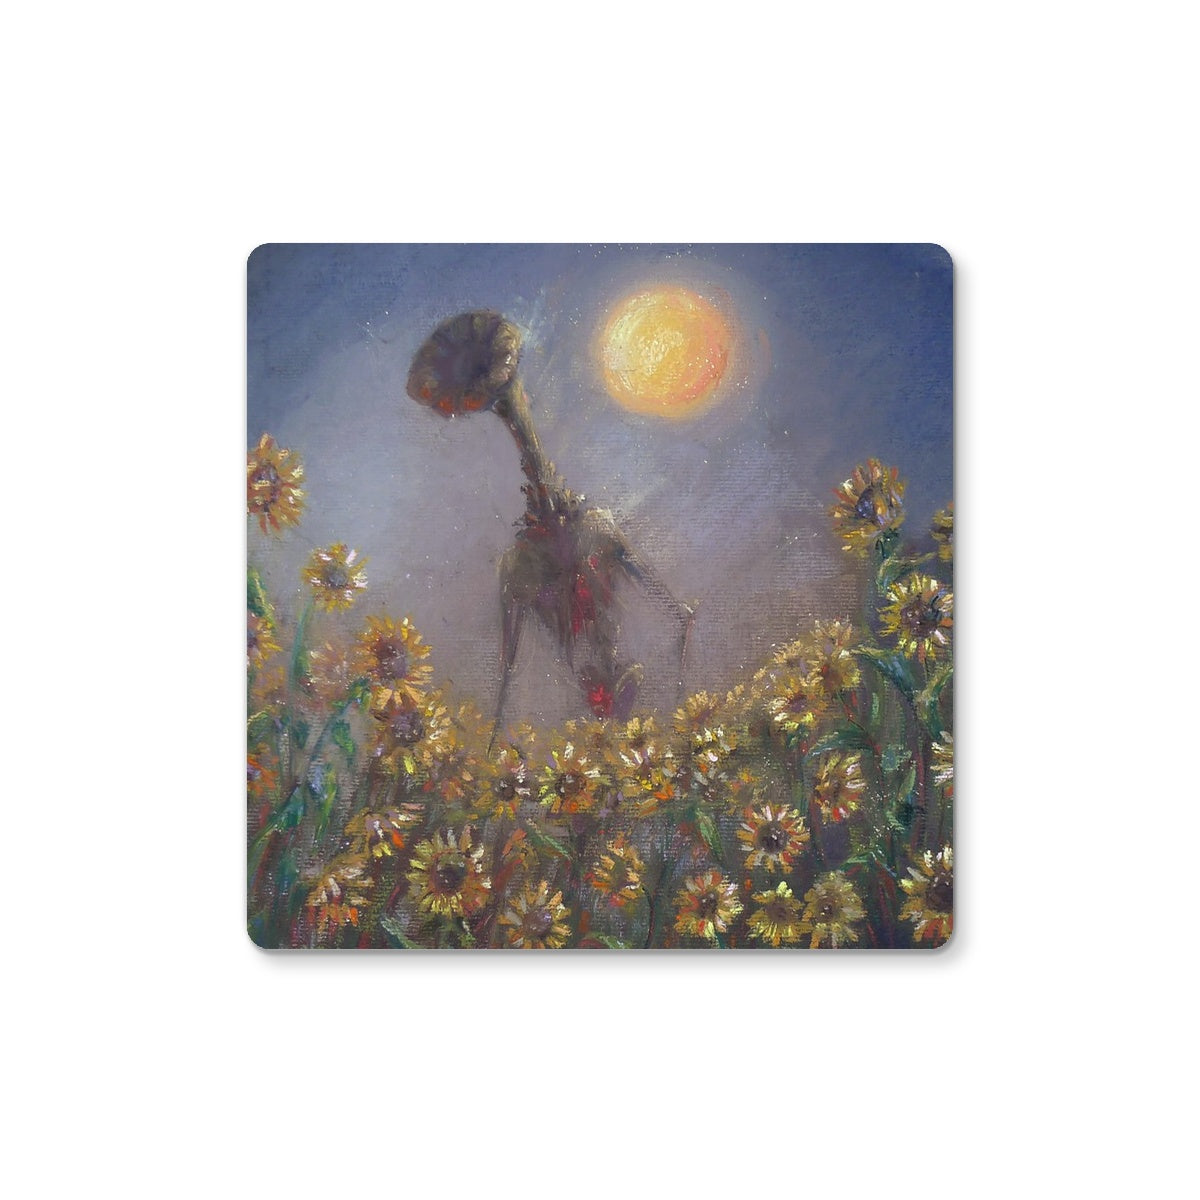 painted coaster